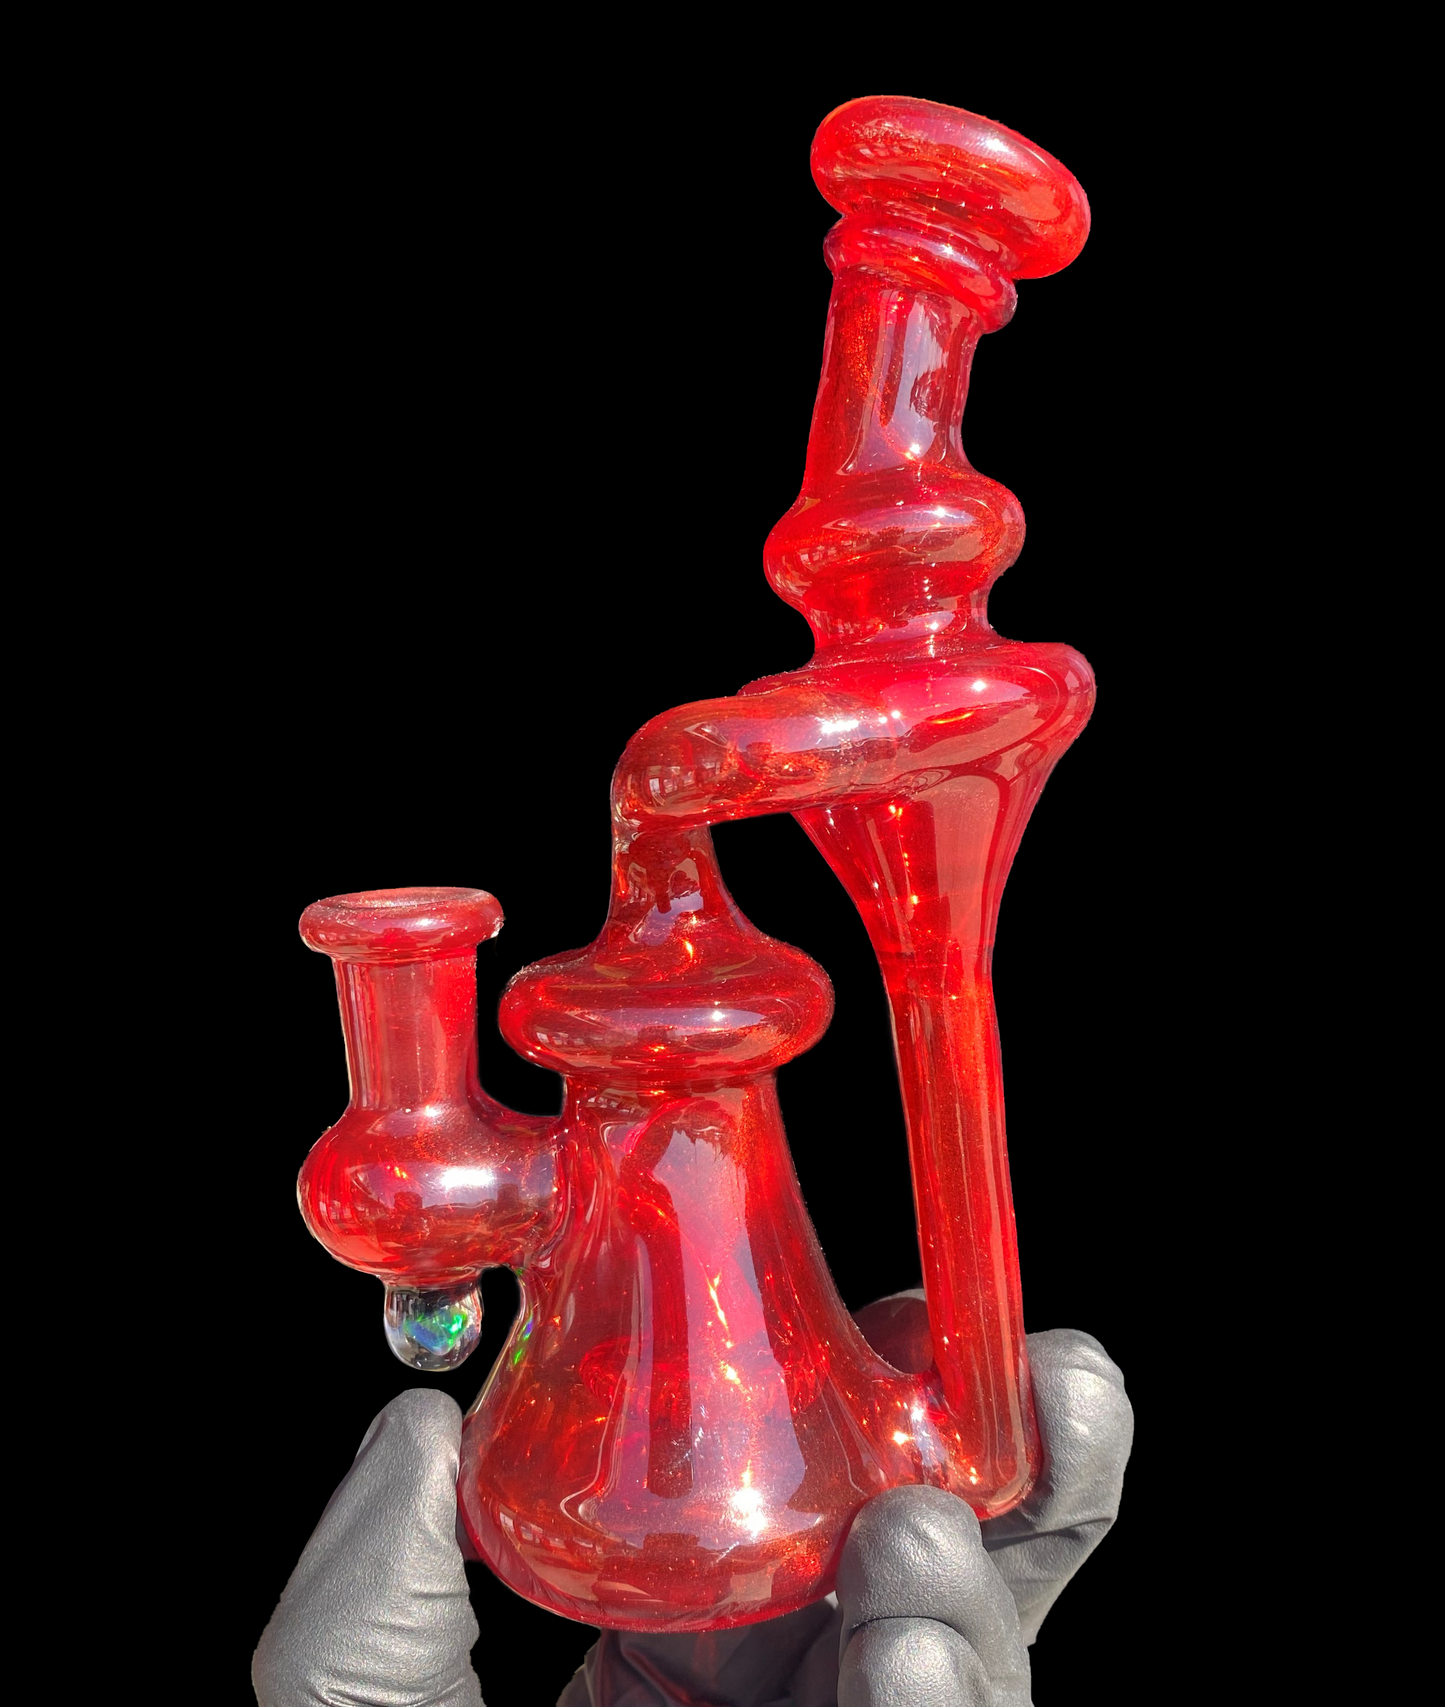 Oj Flame Recycler 1 of 1